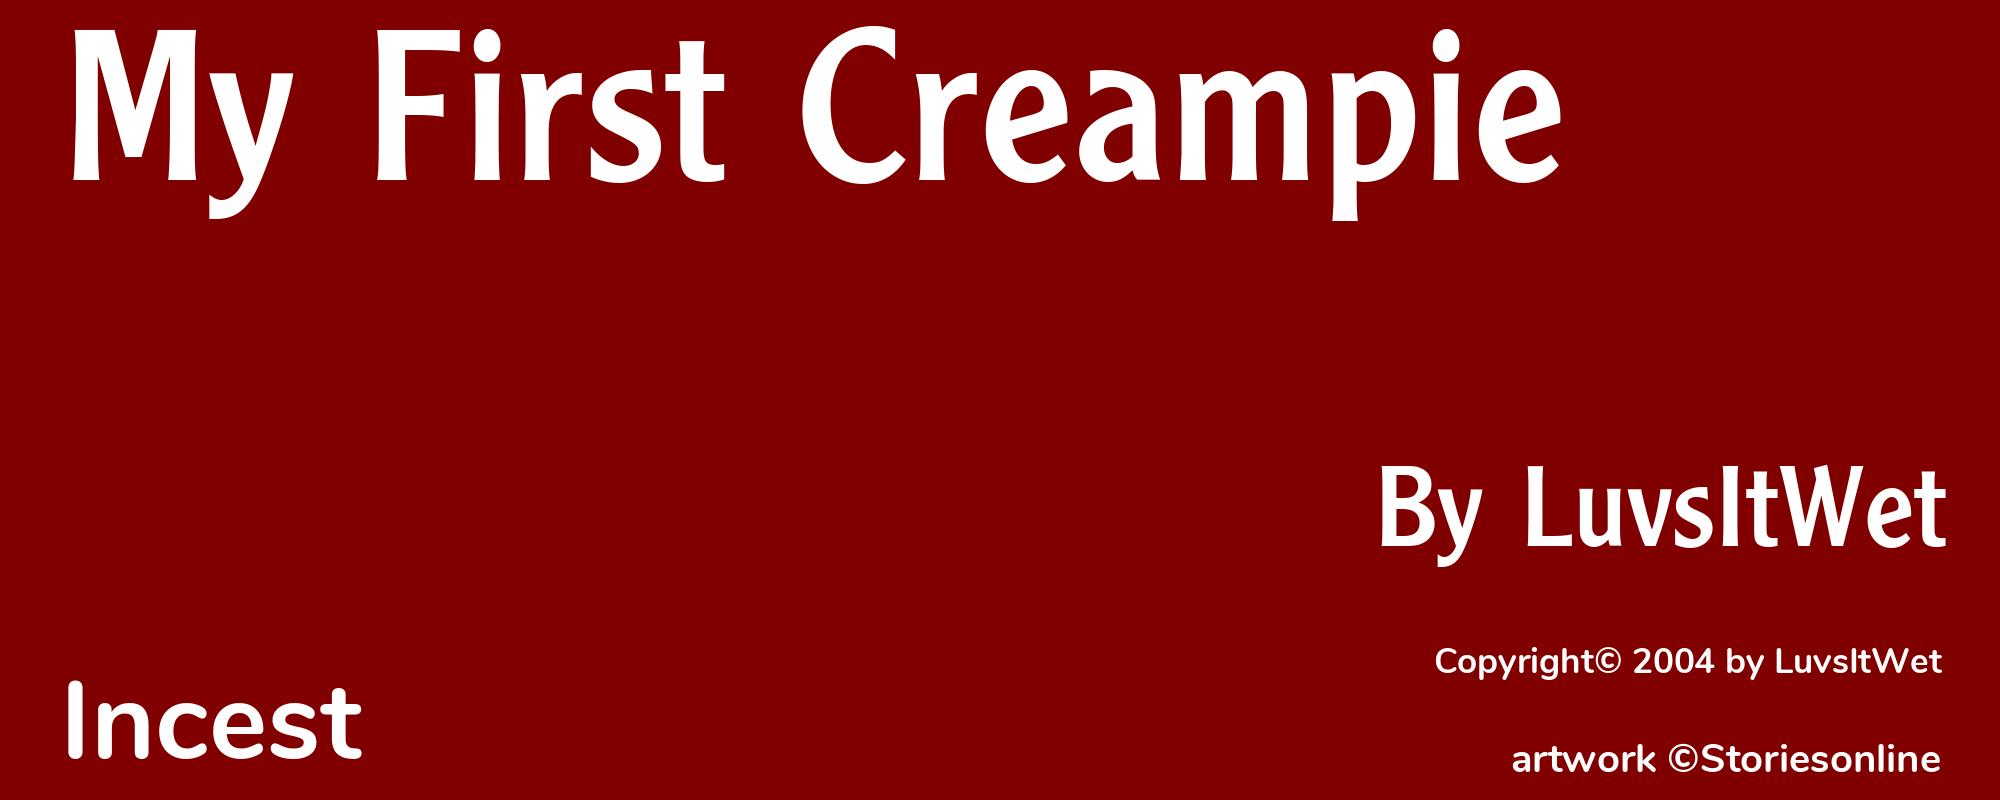 My First Creampie - Cover